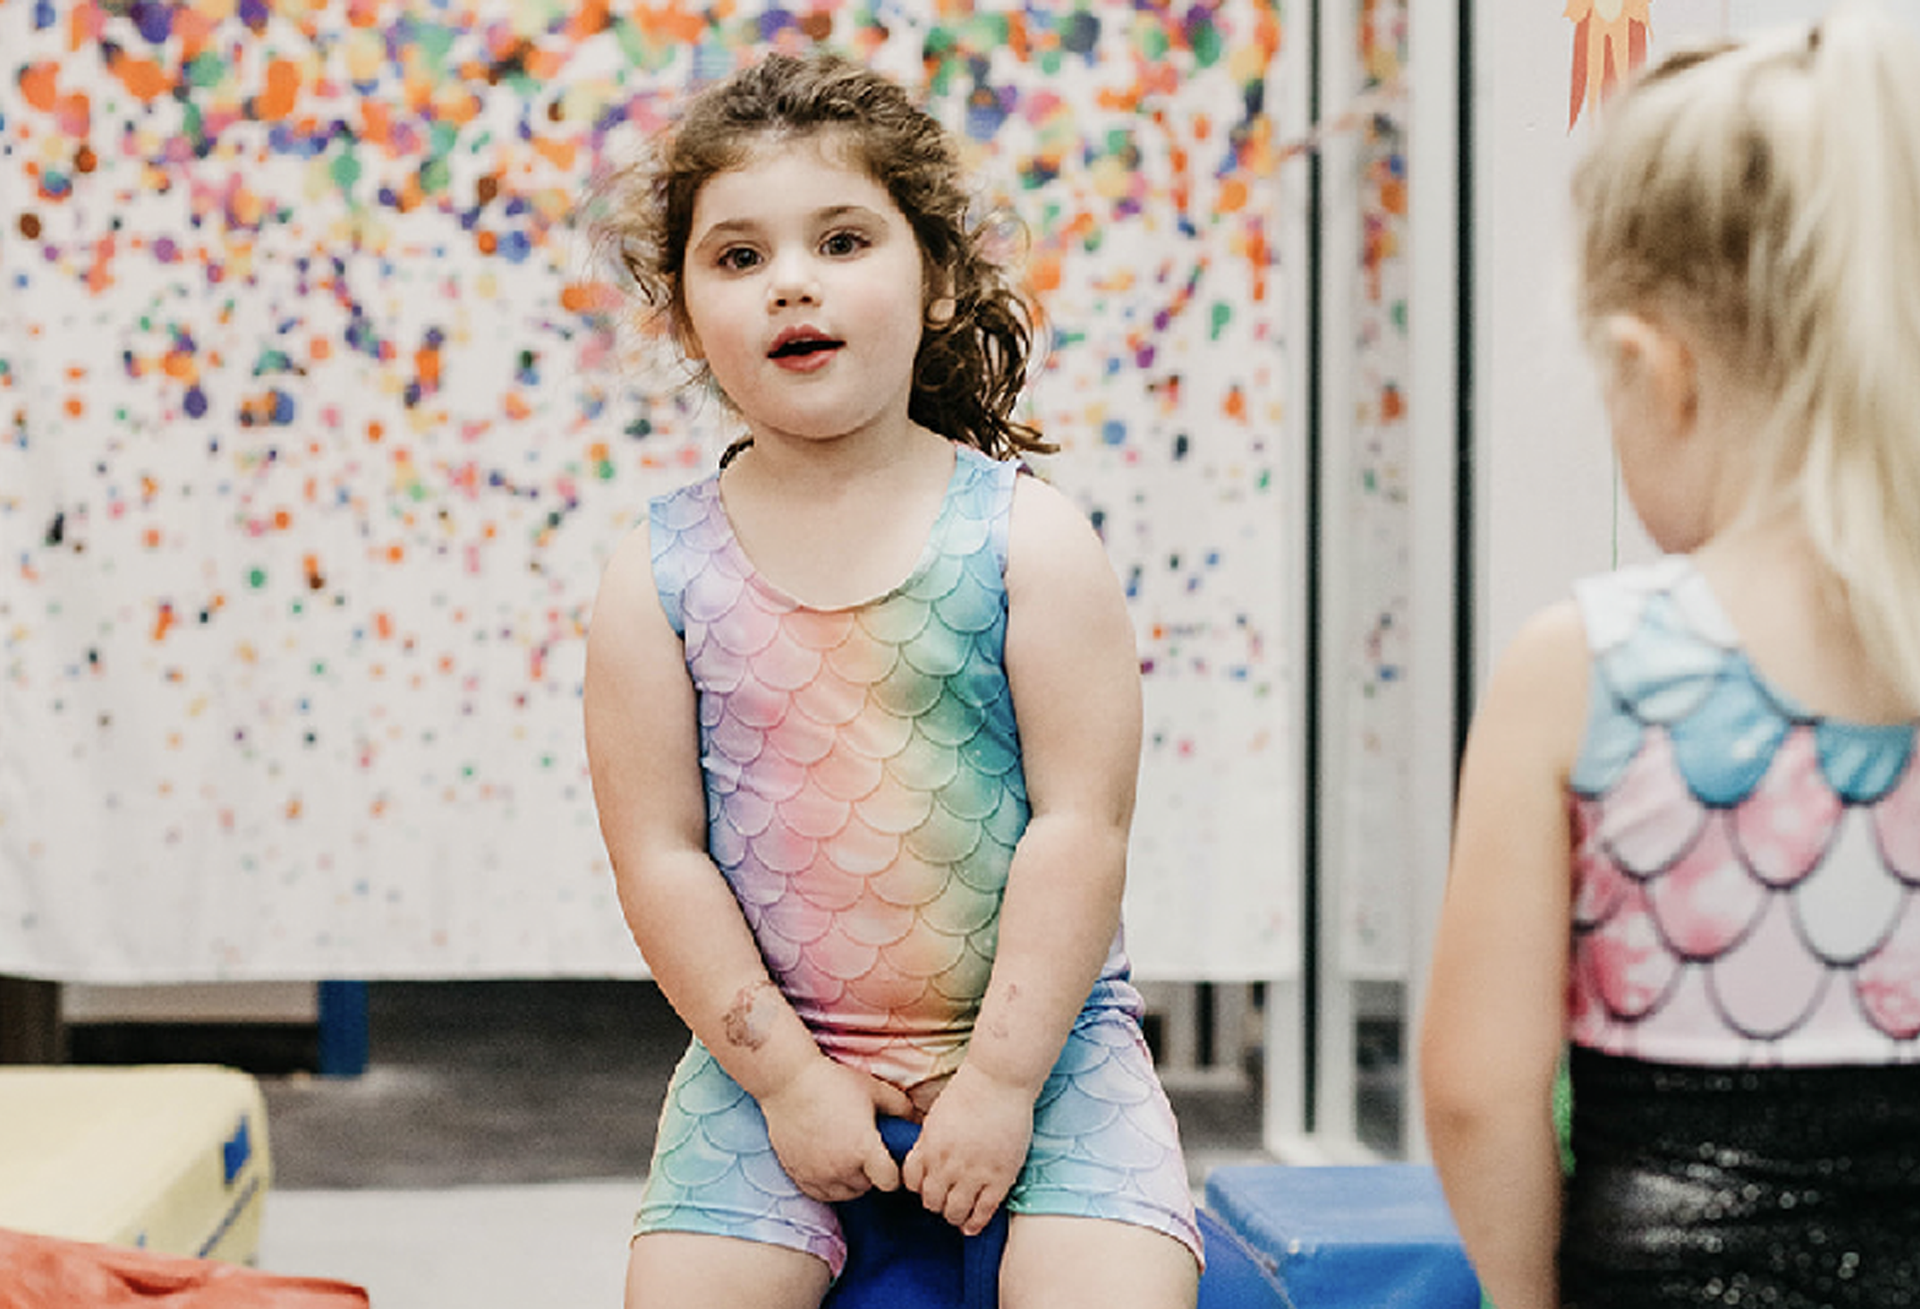 A little girl in a rainbow leotard is sitting on a blue ball.